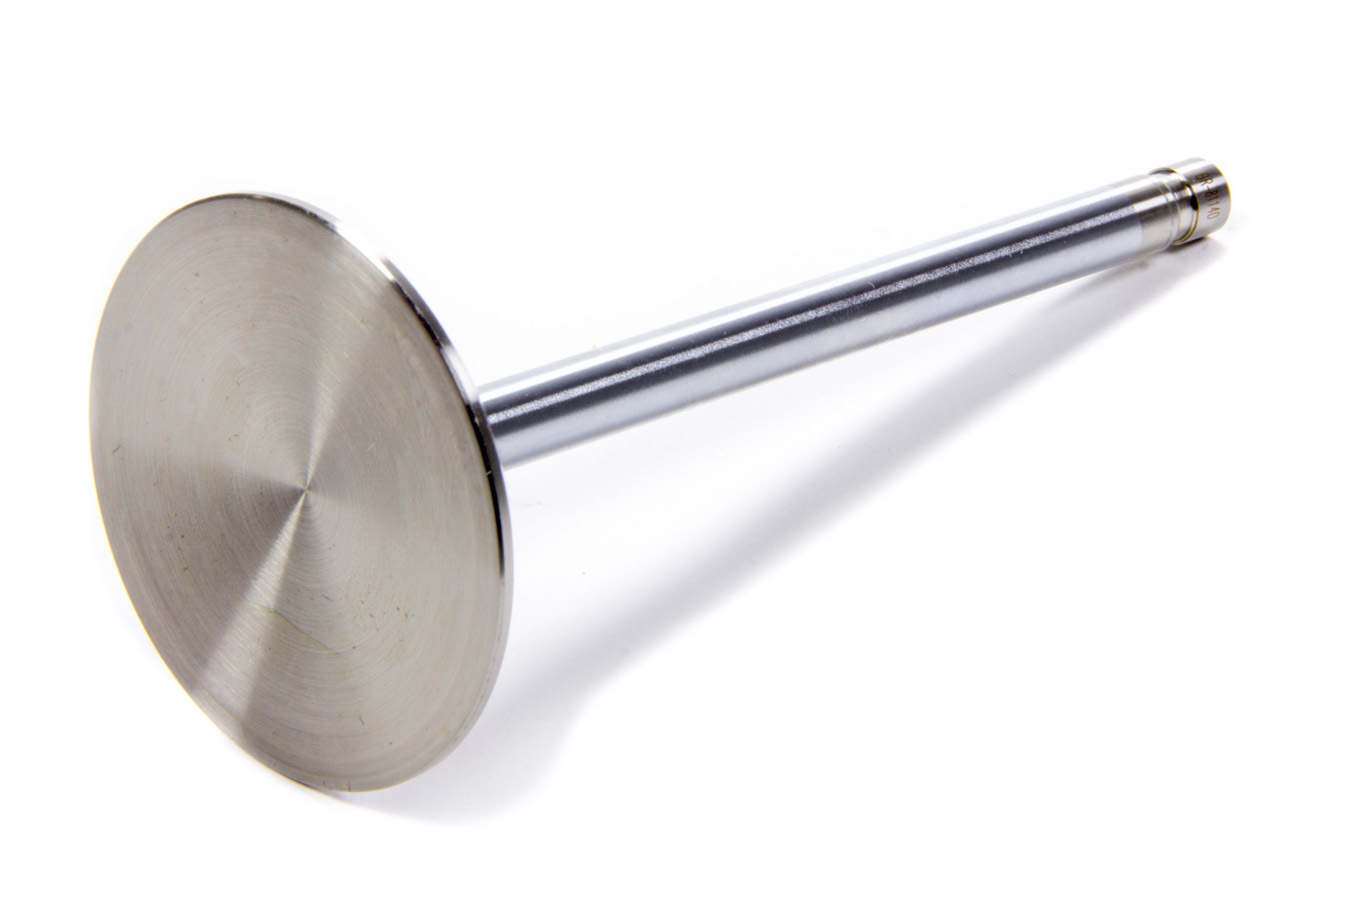 Brodix BR81665 Intake Valve, 2.450 in Head, 11/32 in Valve Stem, 6.650 in Long, Stainless, Big Block Chevy, Each